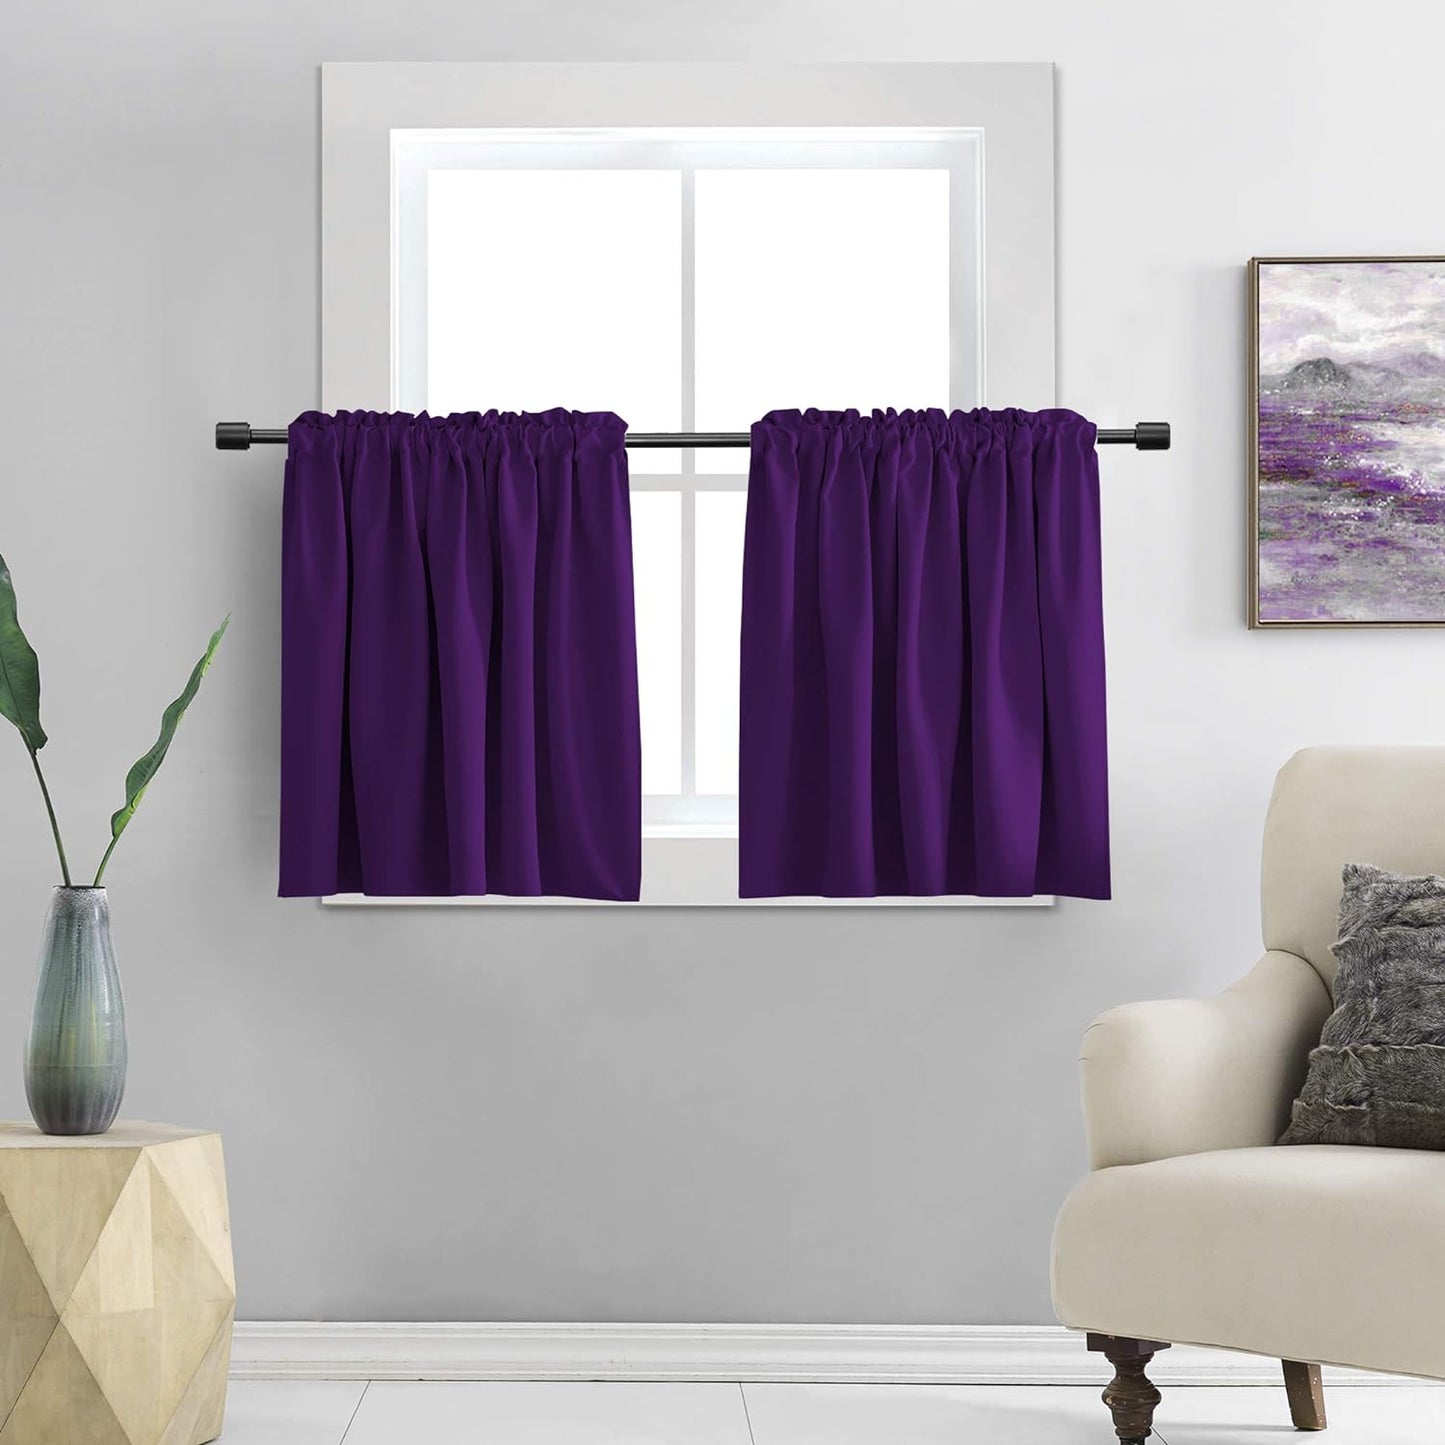 DONREN 24 Inch Length Curtains- 2 Panels Blackout Thermal Insulating Small Curtain Tiers for Bathroom with Rod Pocket (Black,42 Inch Width)  DONREN Royal Purple 42" X 30" 